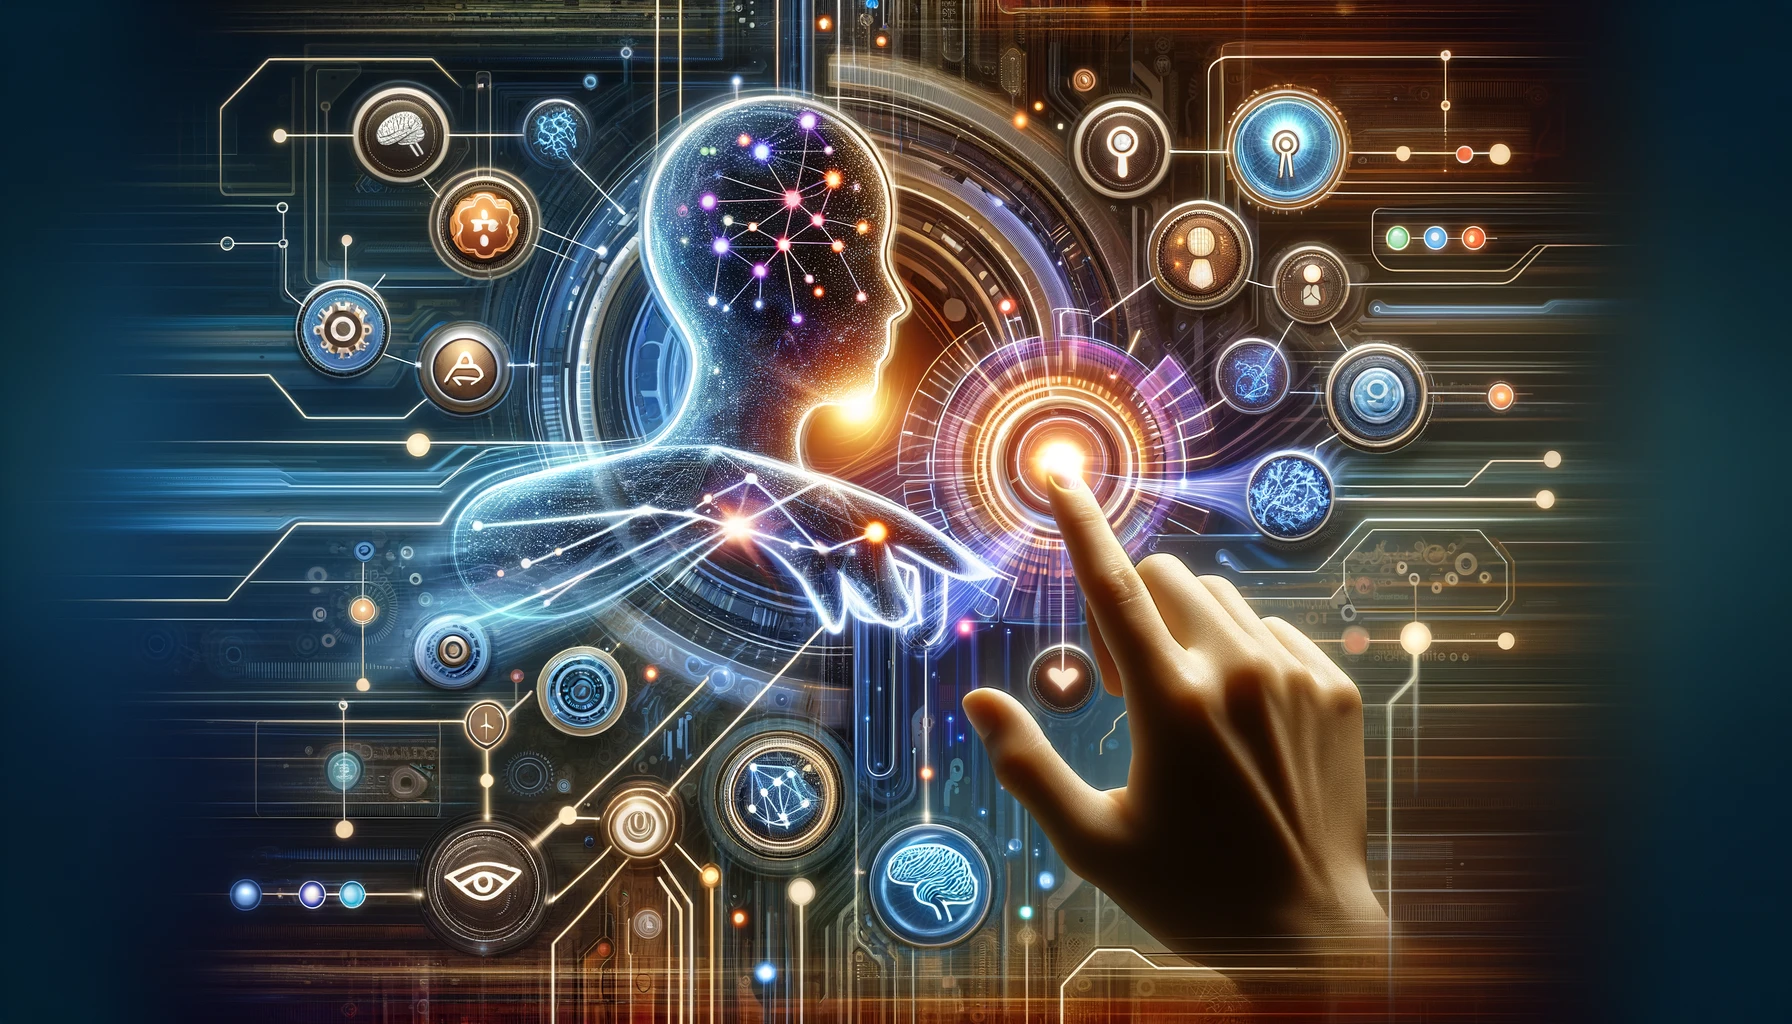 A visual representation of the collaborative partnership between a virtual assistant and artificial intelligence, highlighting a human figure engaging with a futuristic AI interface through a touch-based holographic screen filled with AI symbols and icons.